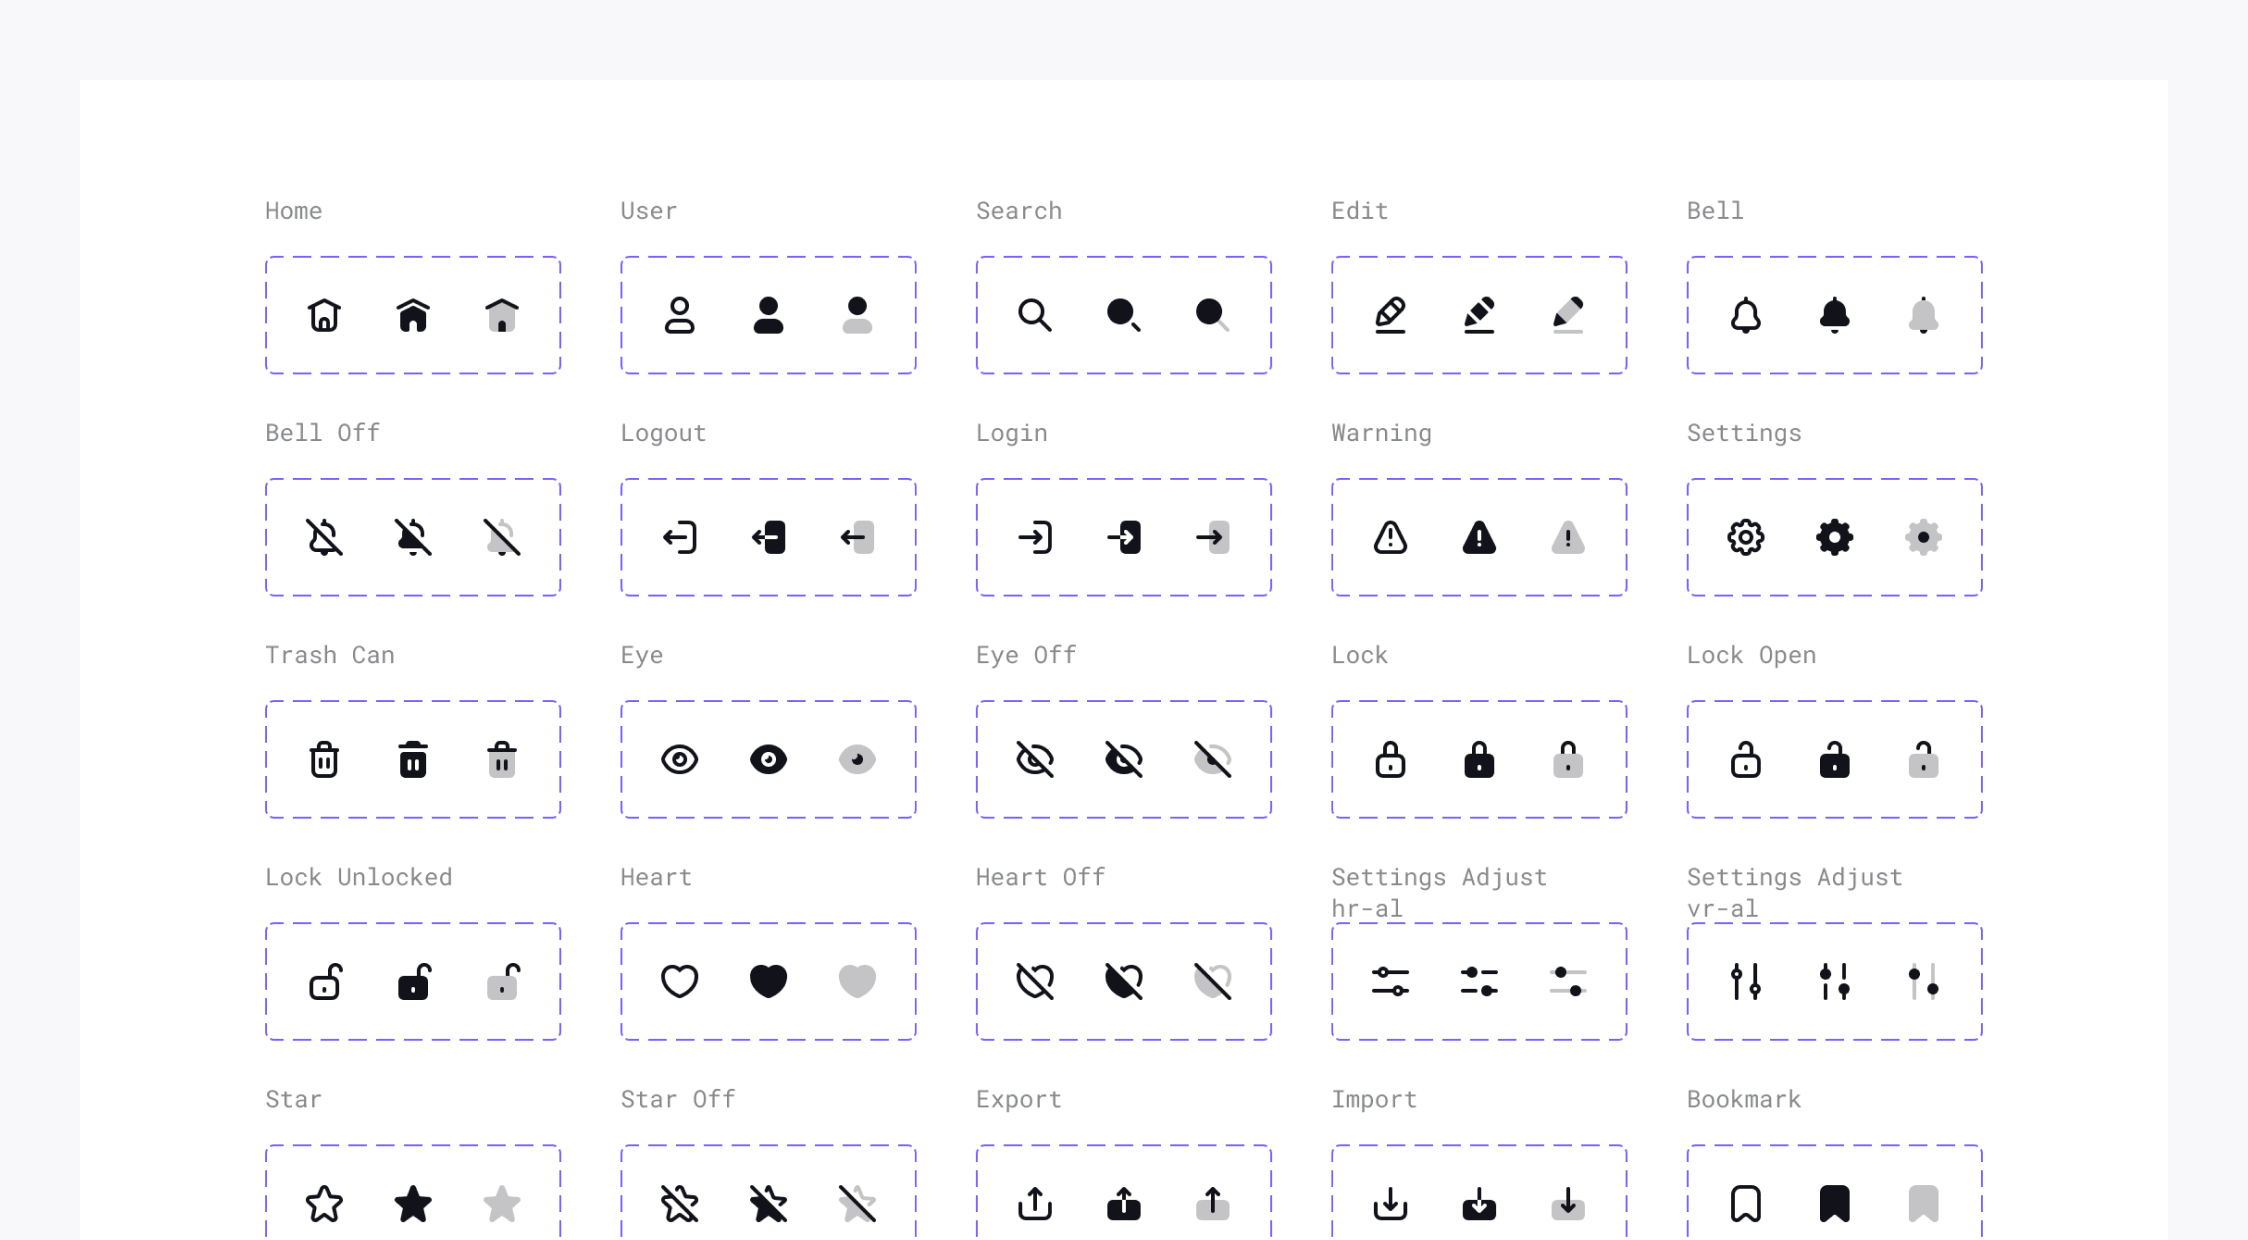 New icons in Universal Icon Set in Figma. Icons for home, user, search, edit, bell, logout, login, warning, settings, trash can, eye, lock, heart, star, export, import, and bookmark, each with multiple variations.